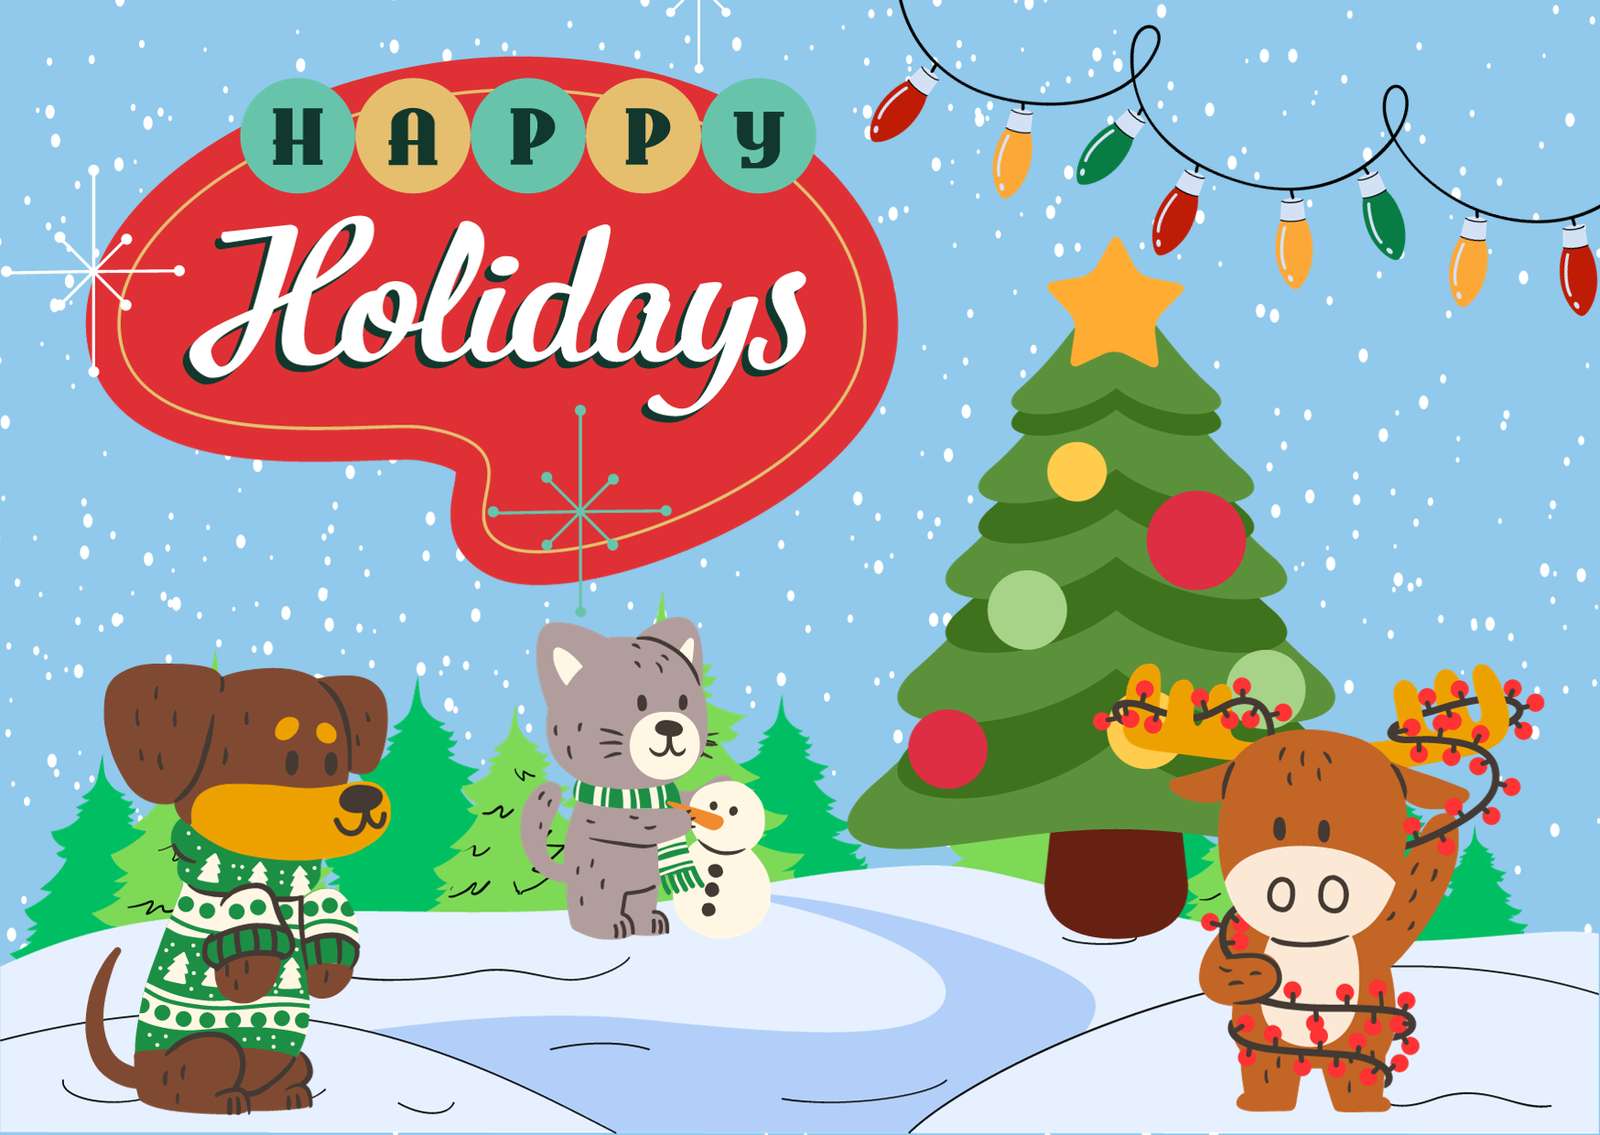 Happy Holidays puzzle online from photo